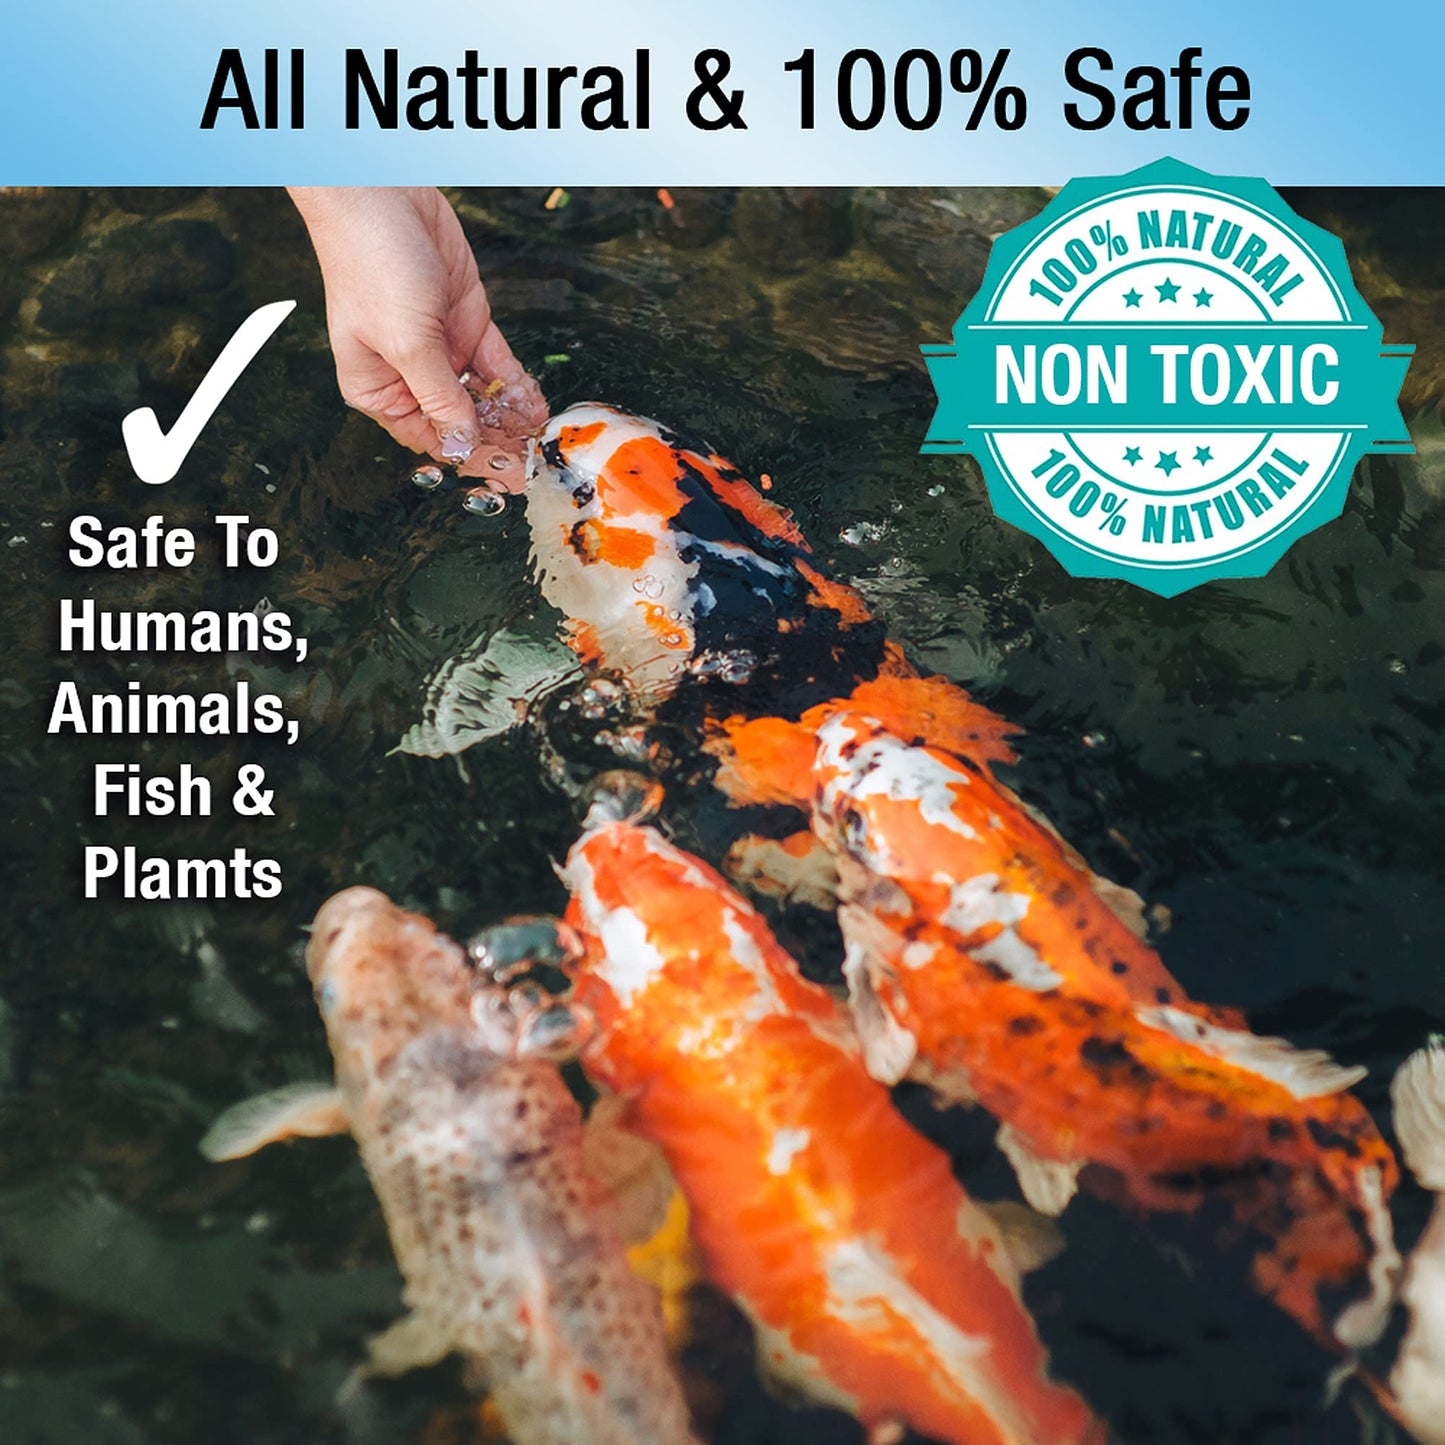 MICROBE-LIFT PL Pond Bacteria and Outdoor Water Garden Cleaner, Safe for Live...